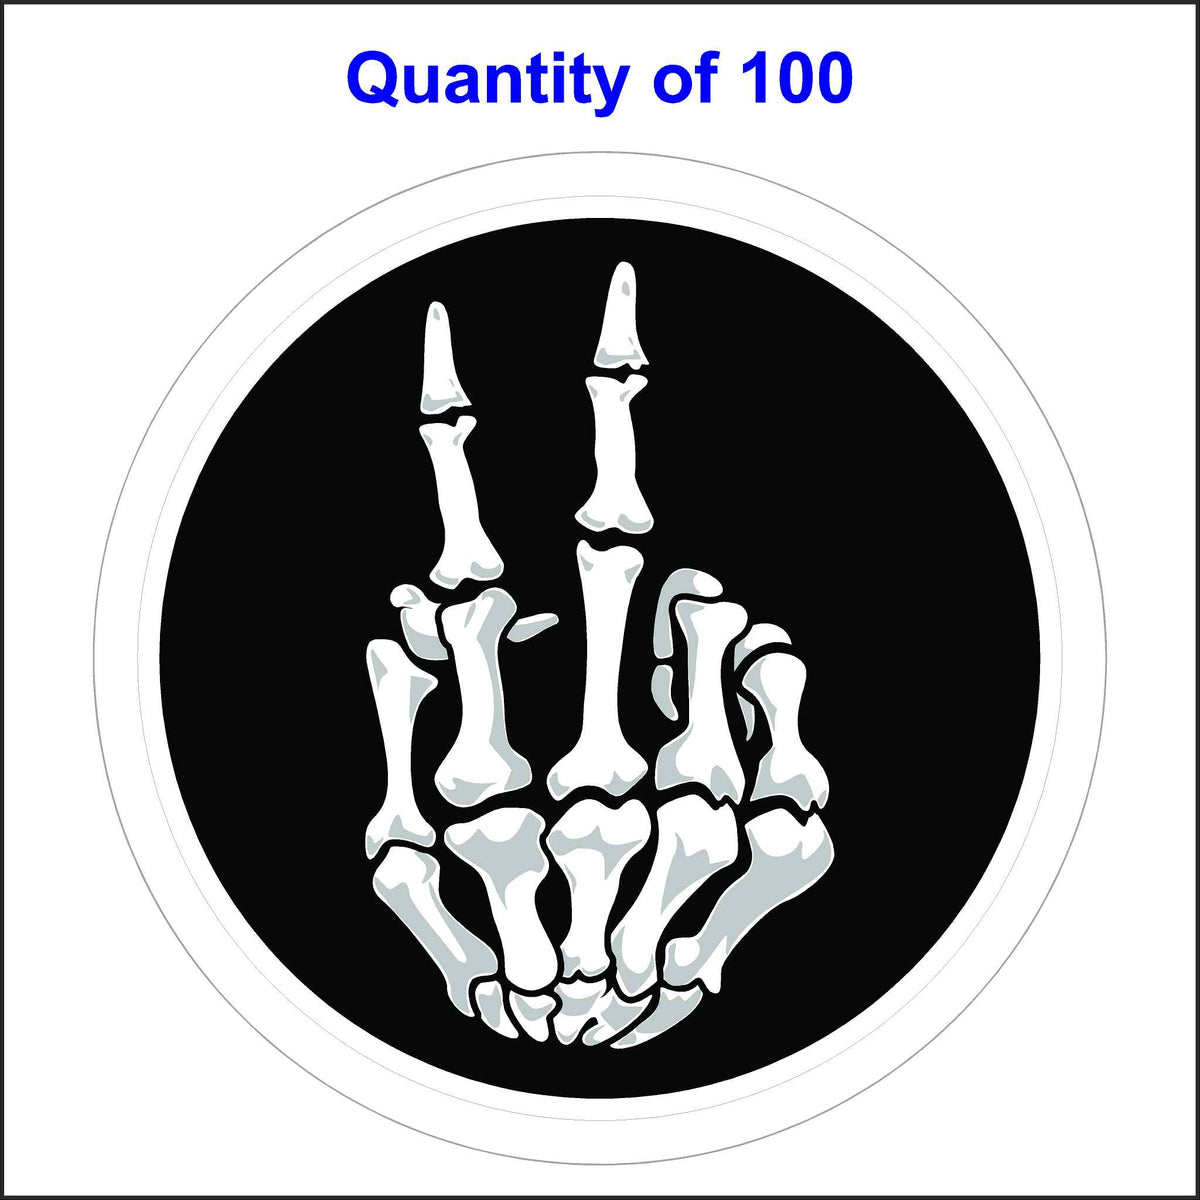 This Skeleton Hand Peace Sign Sticker Has a Skeleton Hand Showing the Peace Sign On a Black Background. 100 Quantity